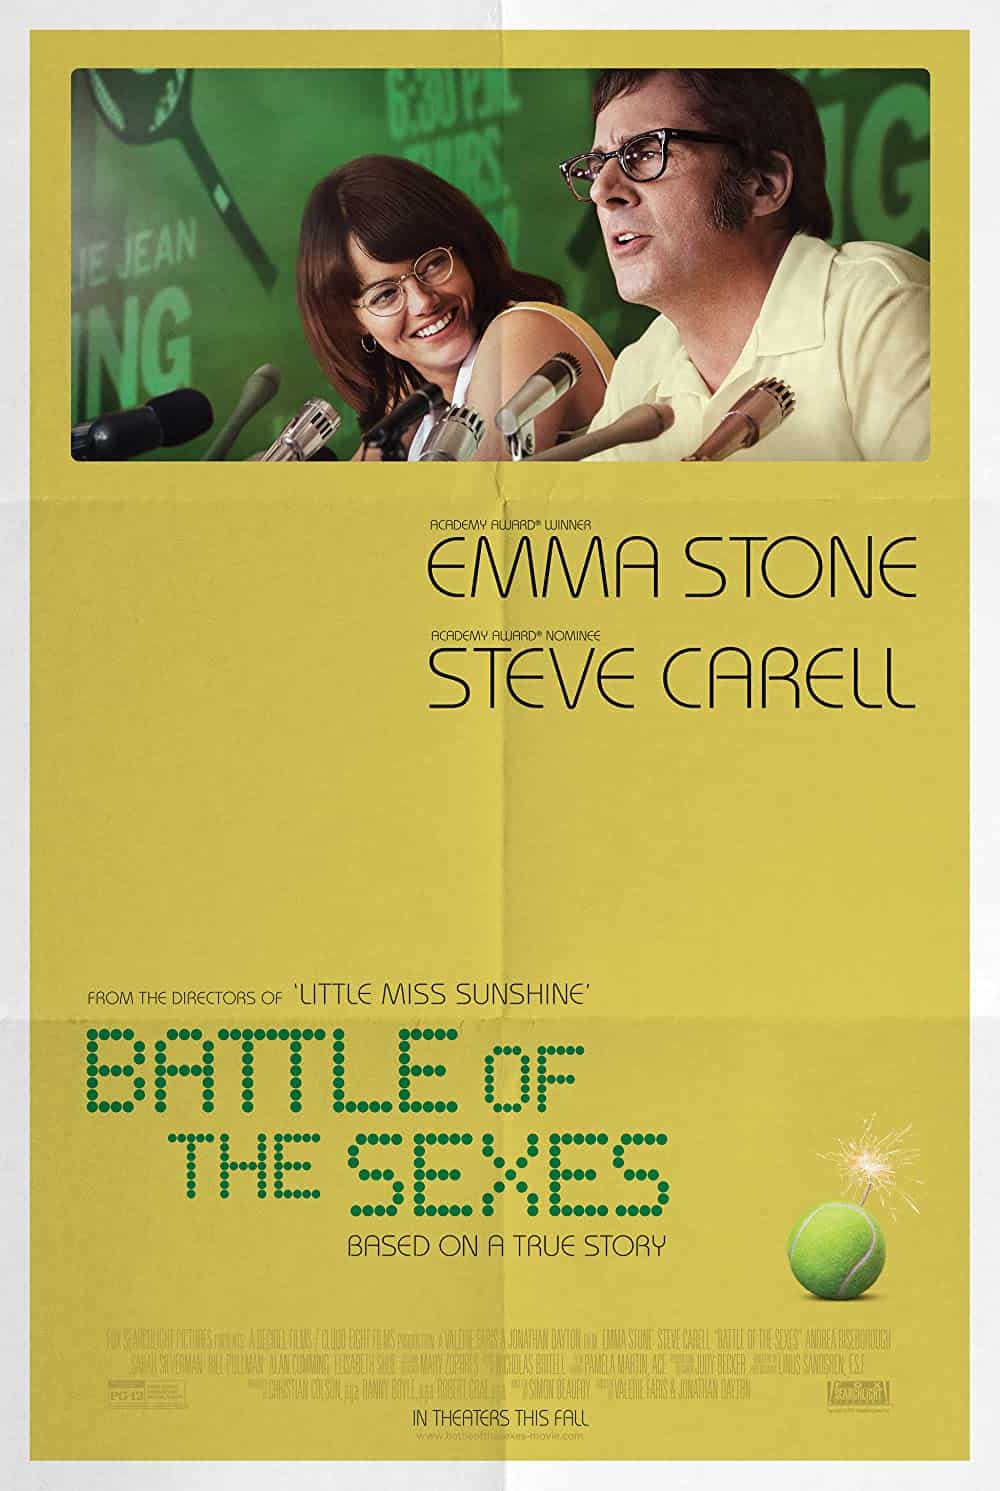 Battle of the Sexes (2017) Best Tennis Movies to Add in Your Watchlist